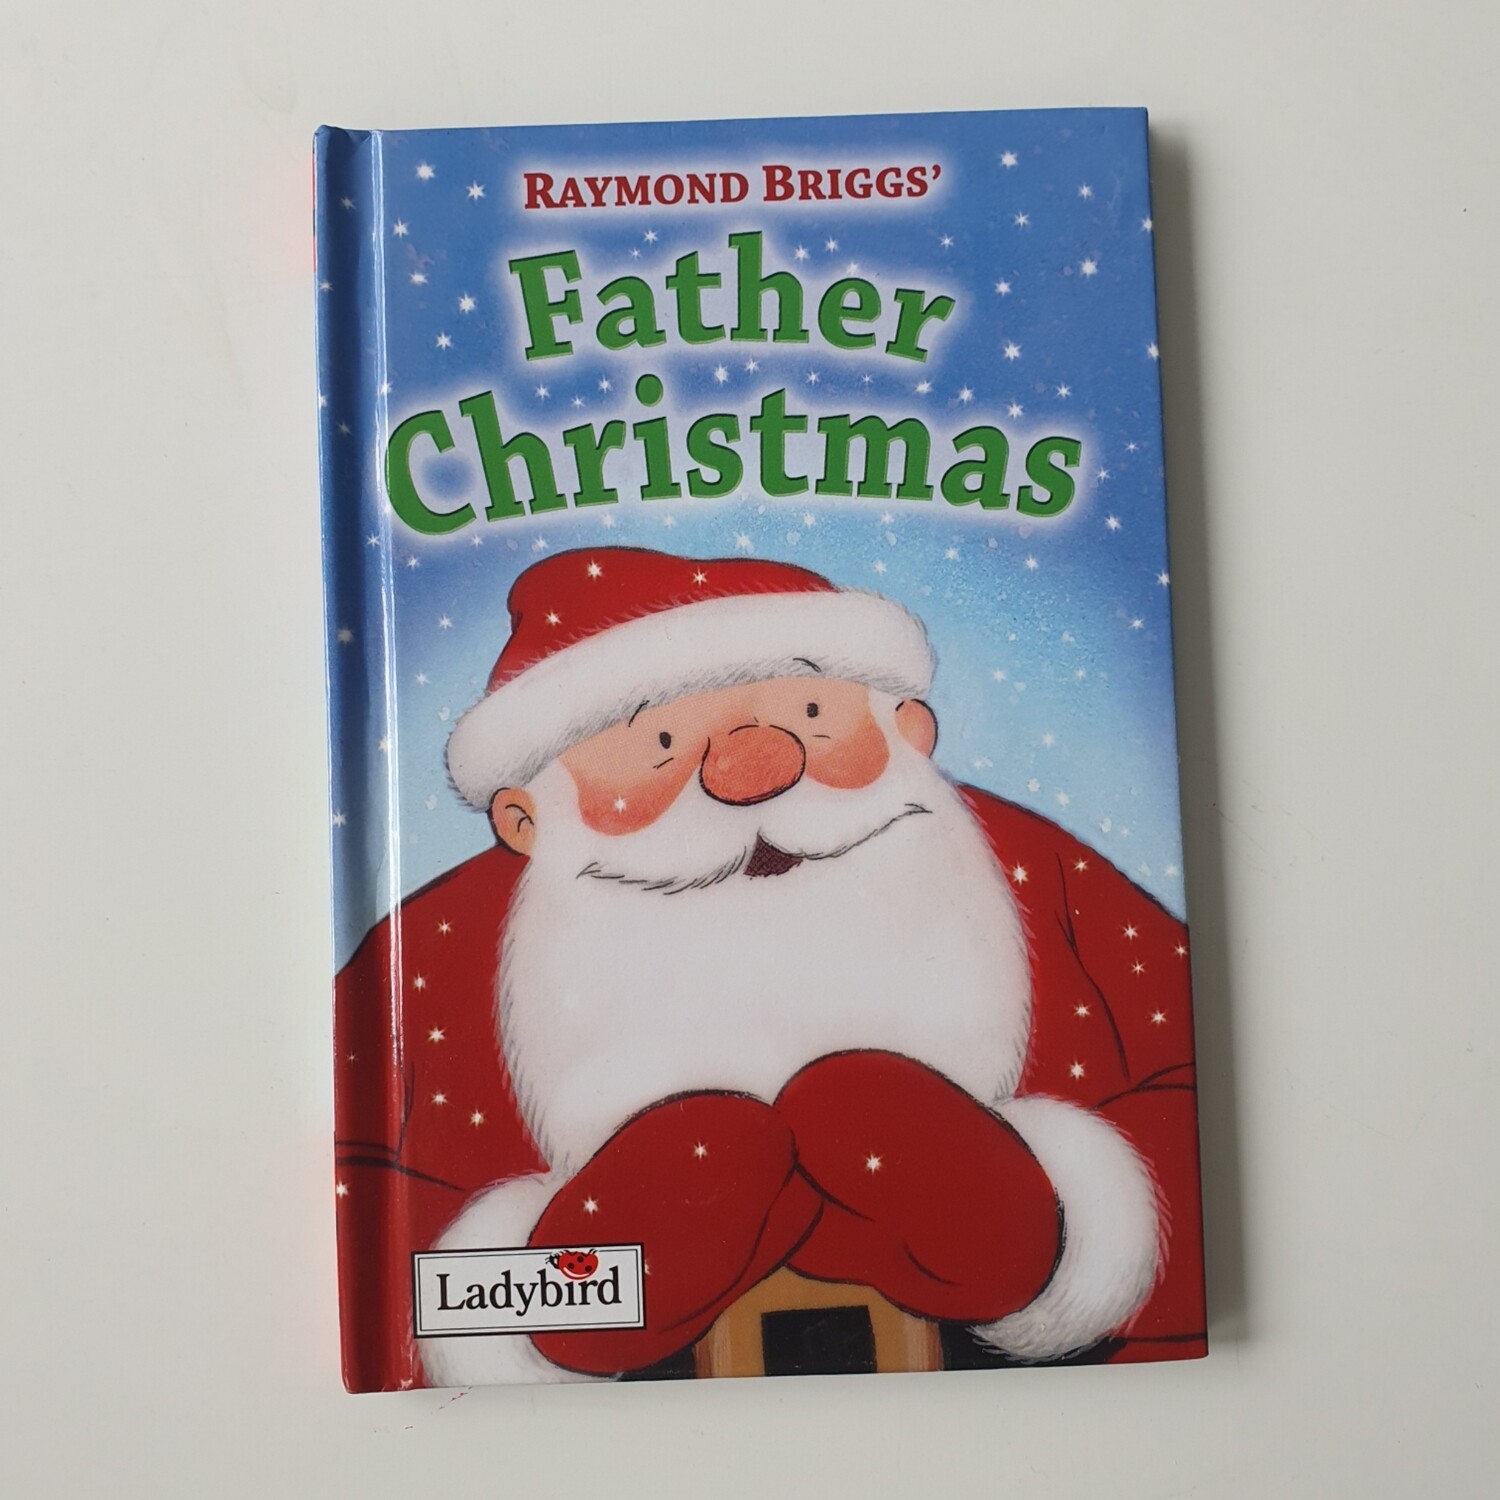 Father Christmas made from a ladybird book - Christmas